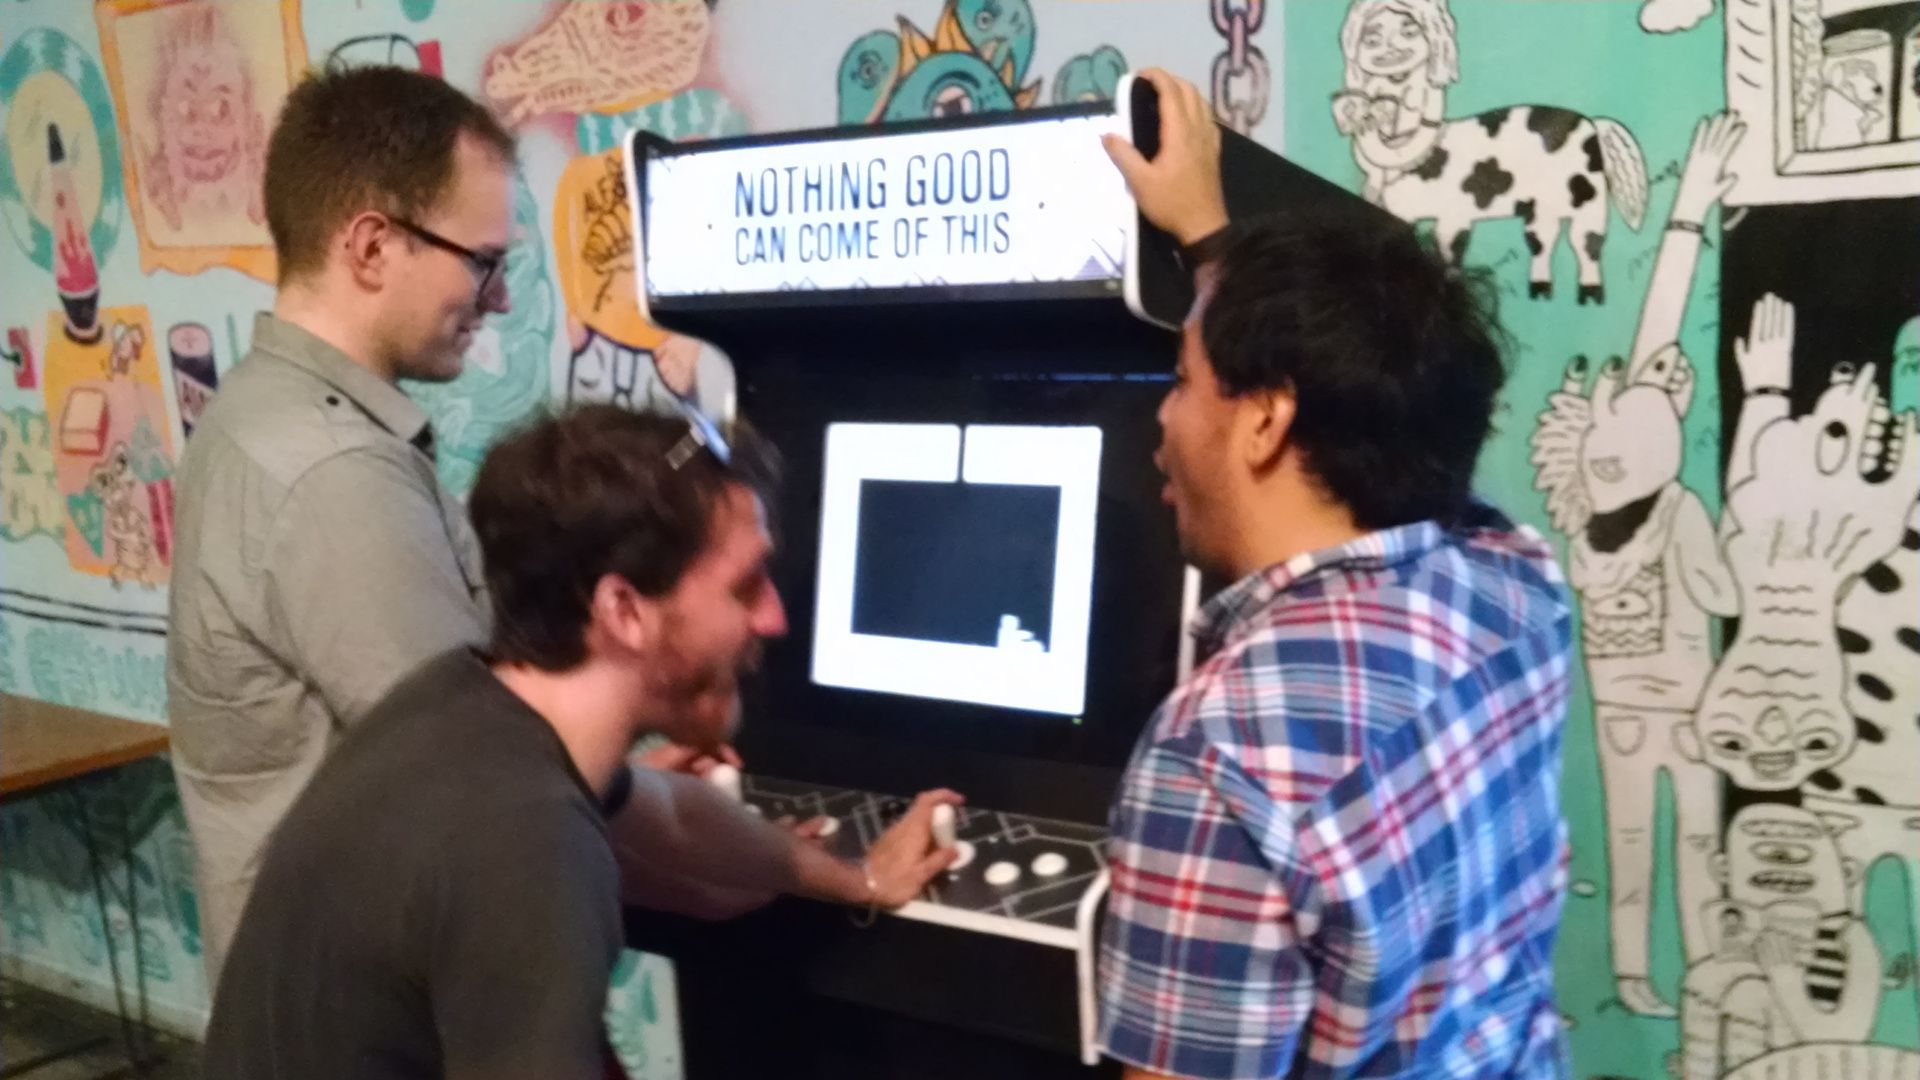 Nothing Good Can Come Of This cabinet from Death By Audio Arcade